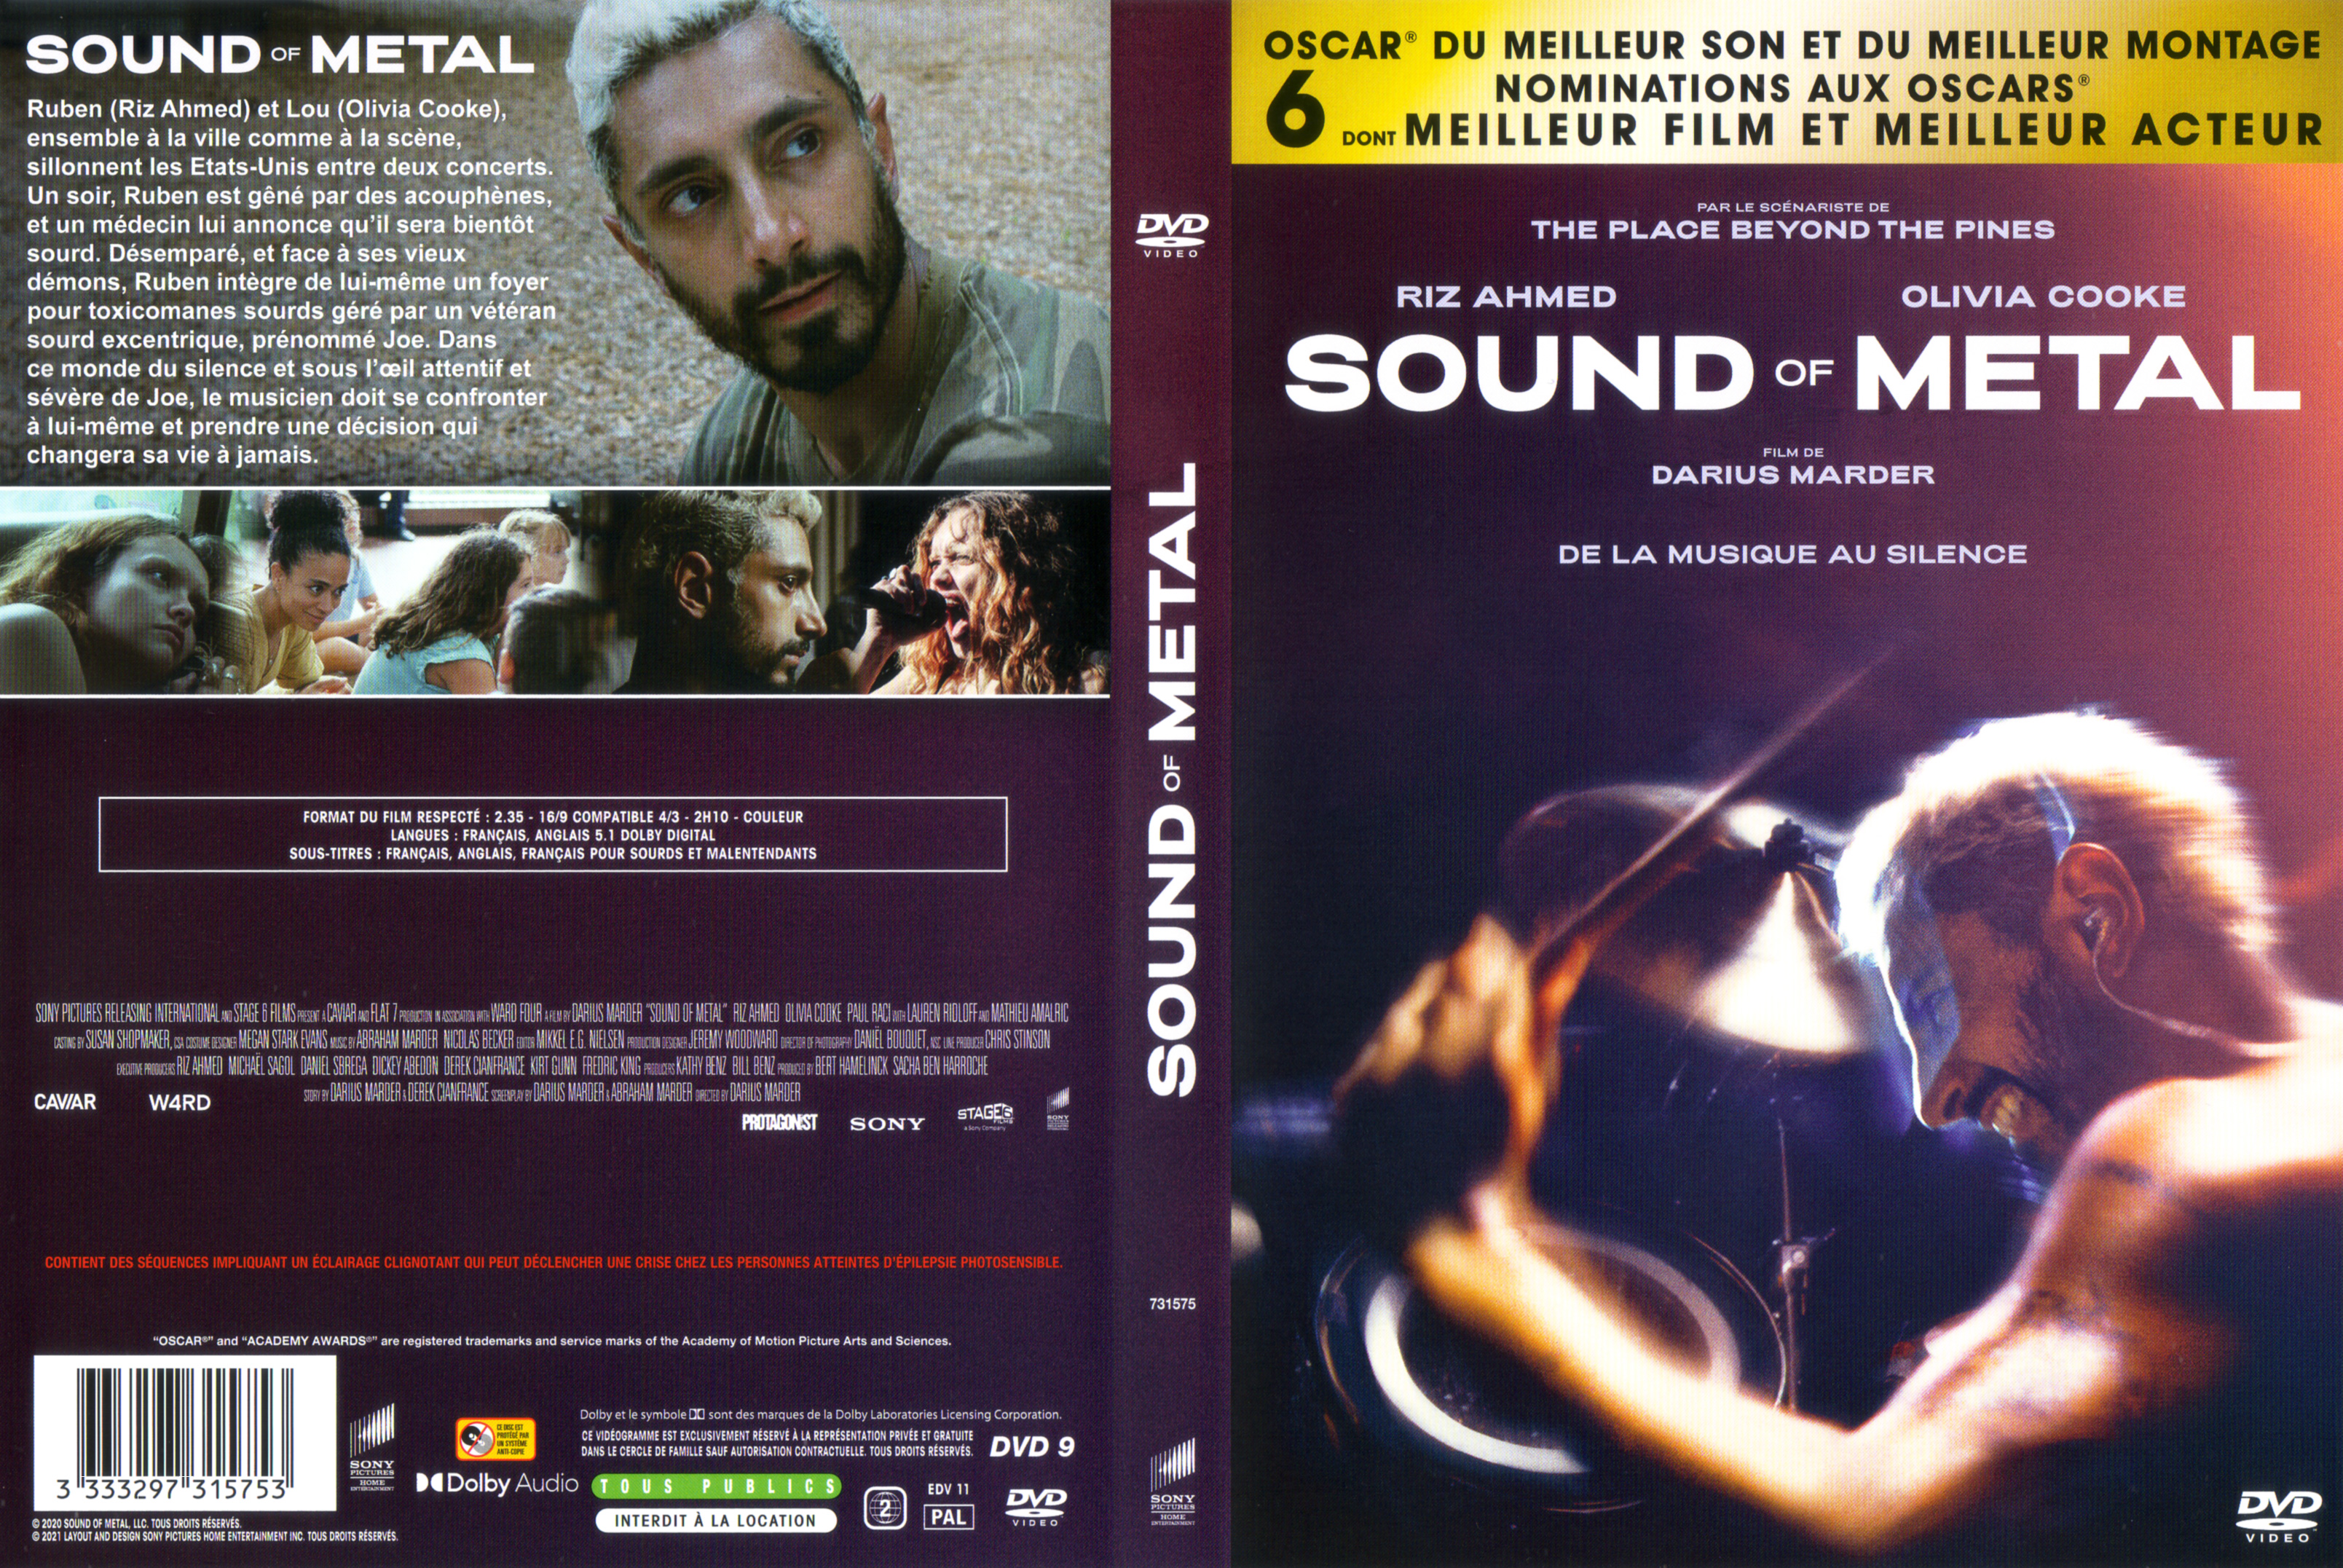 Jaquette DVD Sound of metal